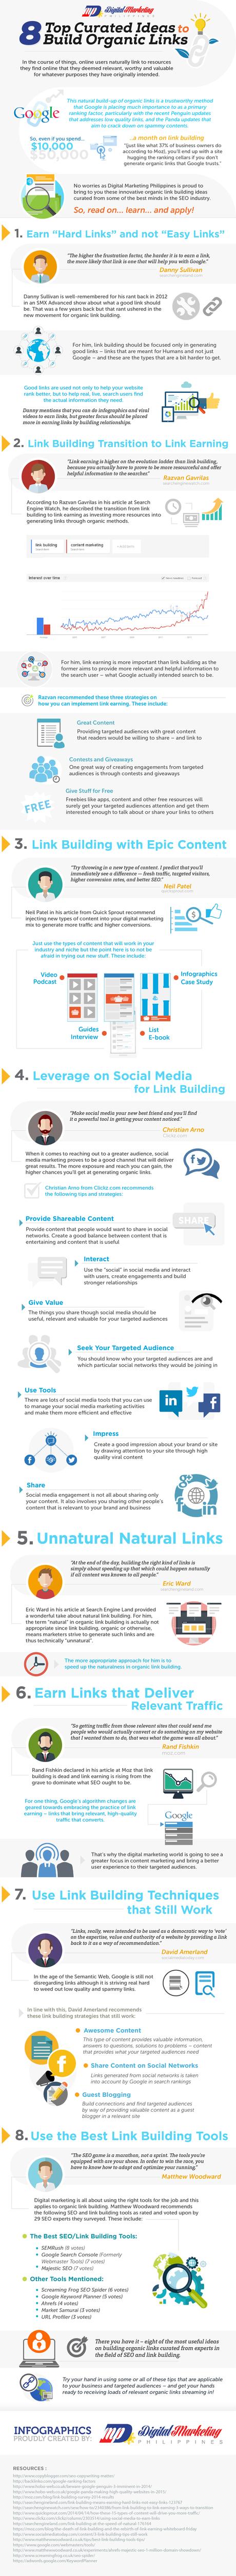 8 Top Curated Ideas to Build Organic Links (Infographic) - An Infographic from Digital Marketing Philippines